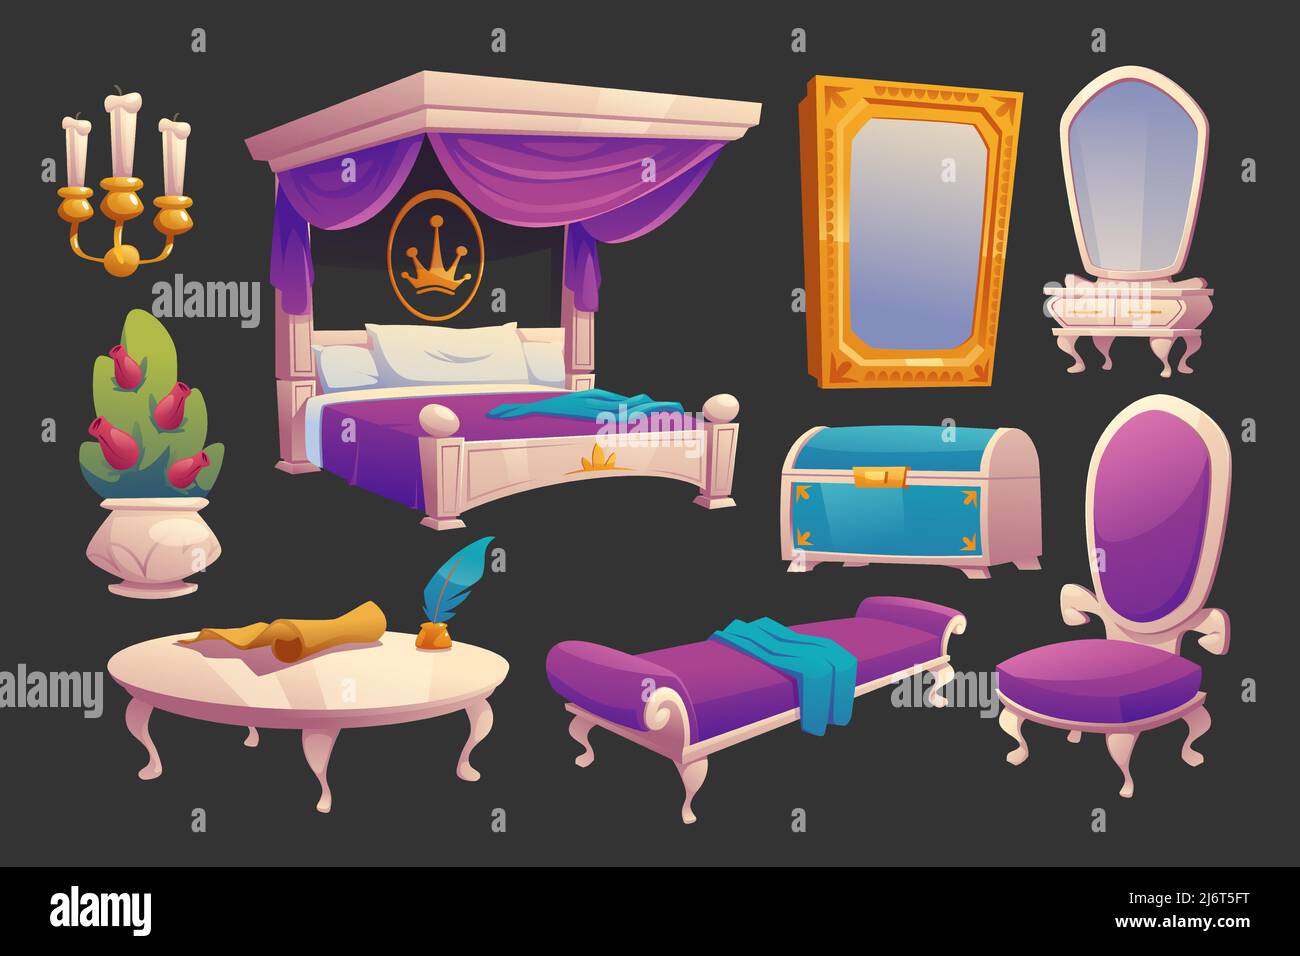 Luxury furniture for royal bedroom. Vector cartoon set of vintage princess room interior with canopy bed, dressing table, mirror in gold frame, couch, chest, candles and flowers Stock Vector